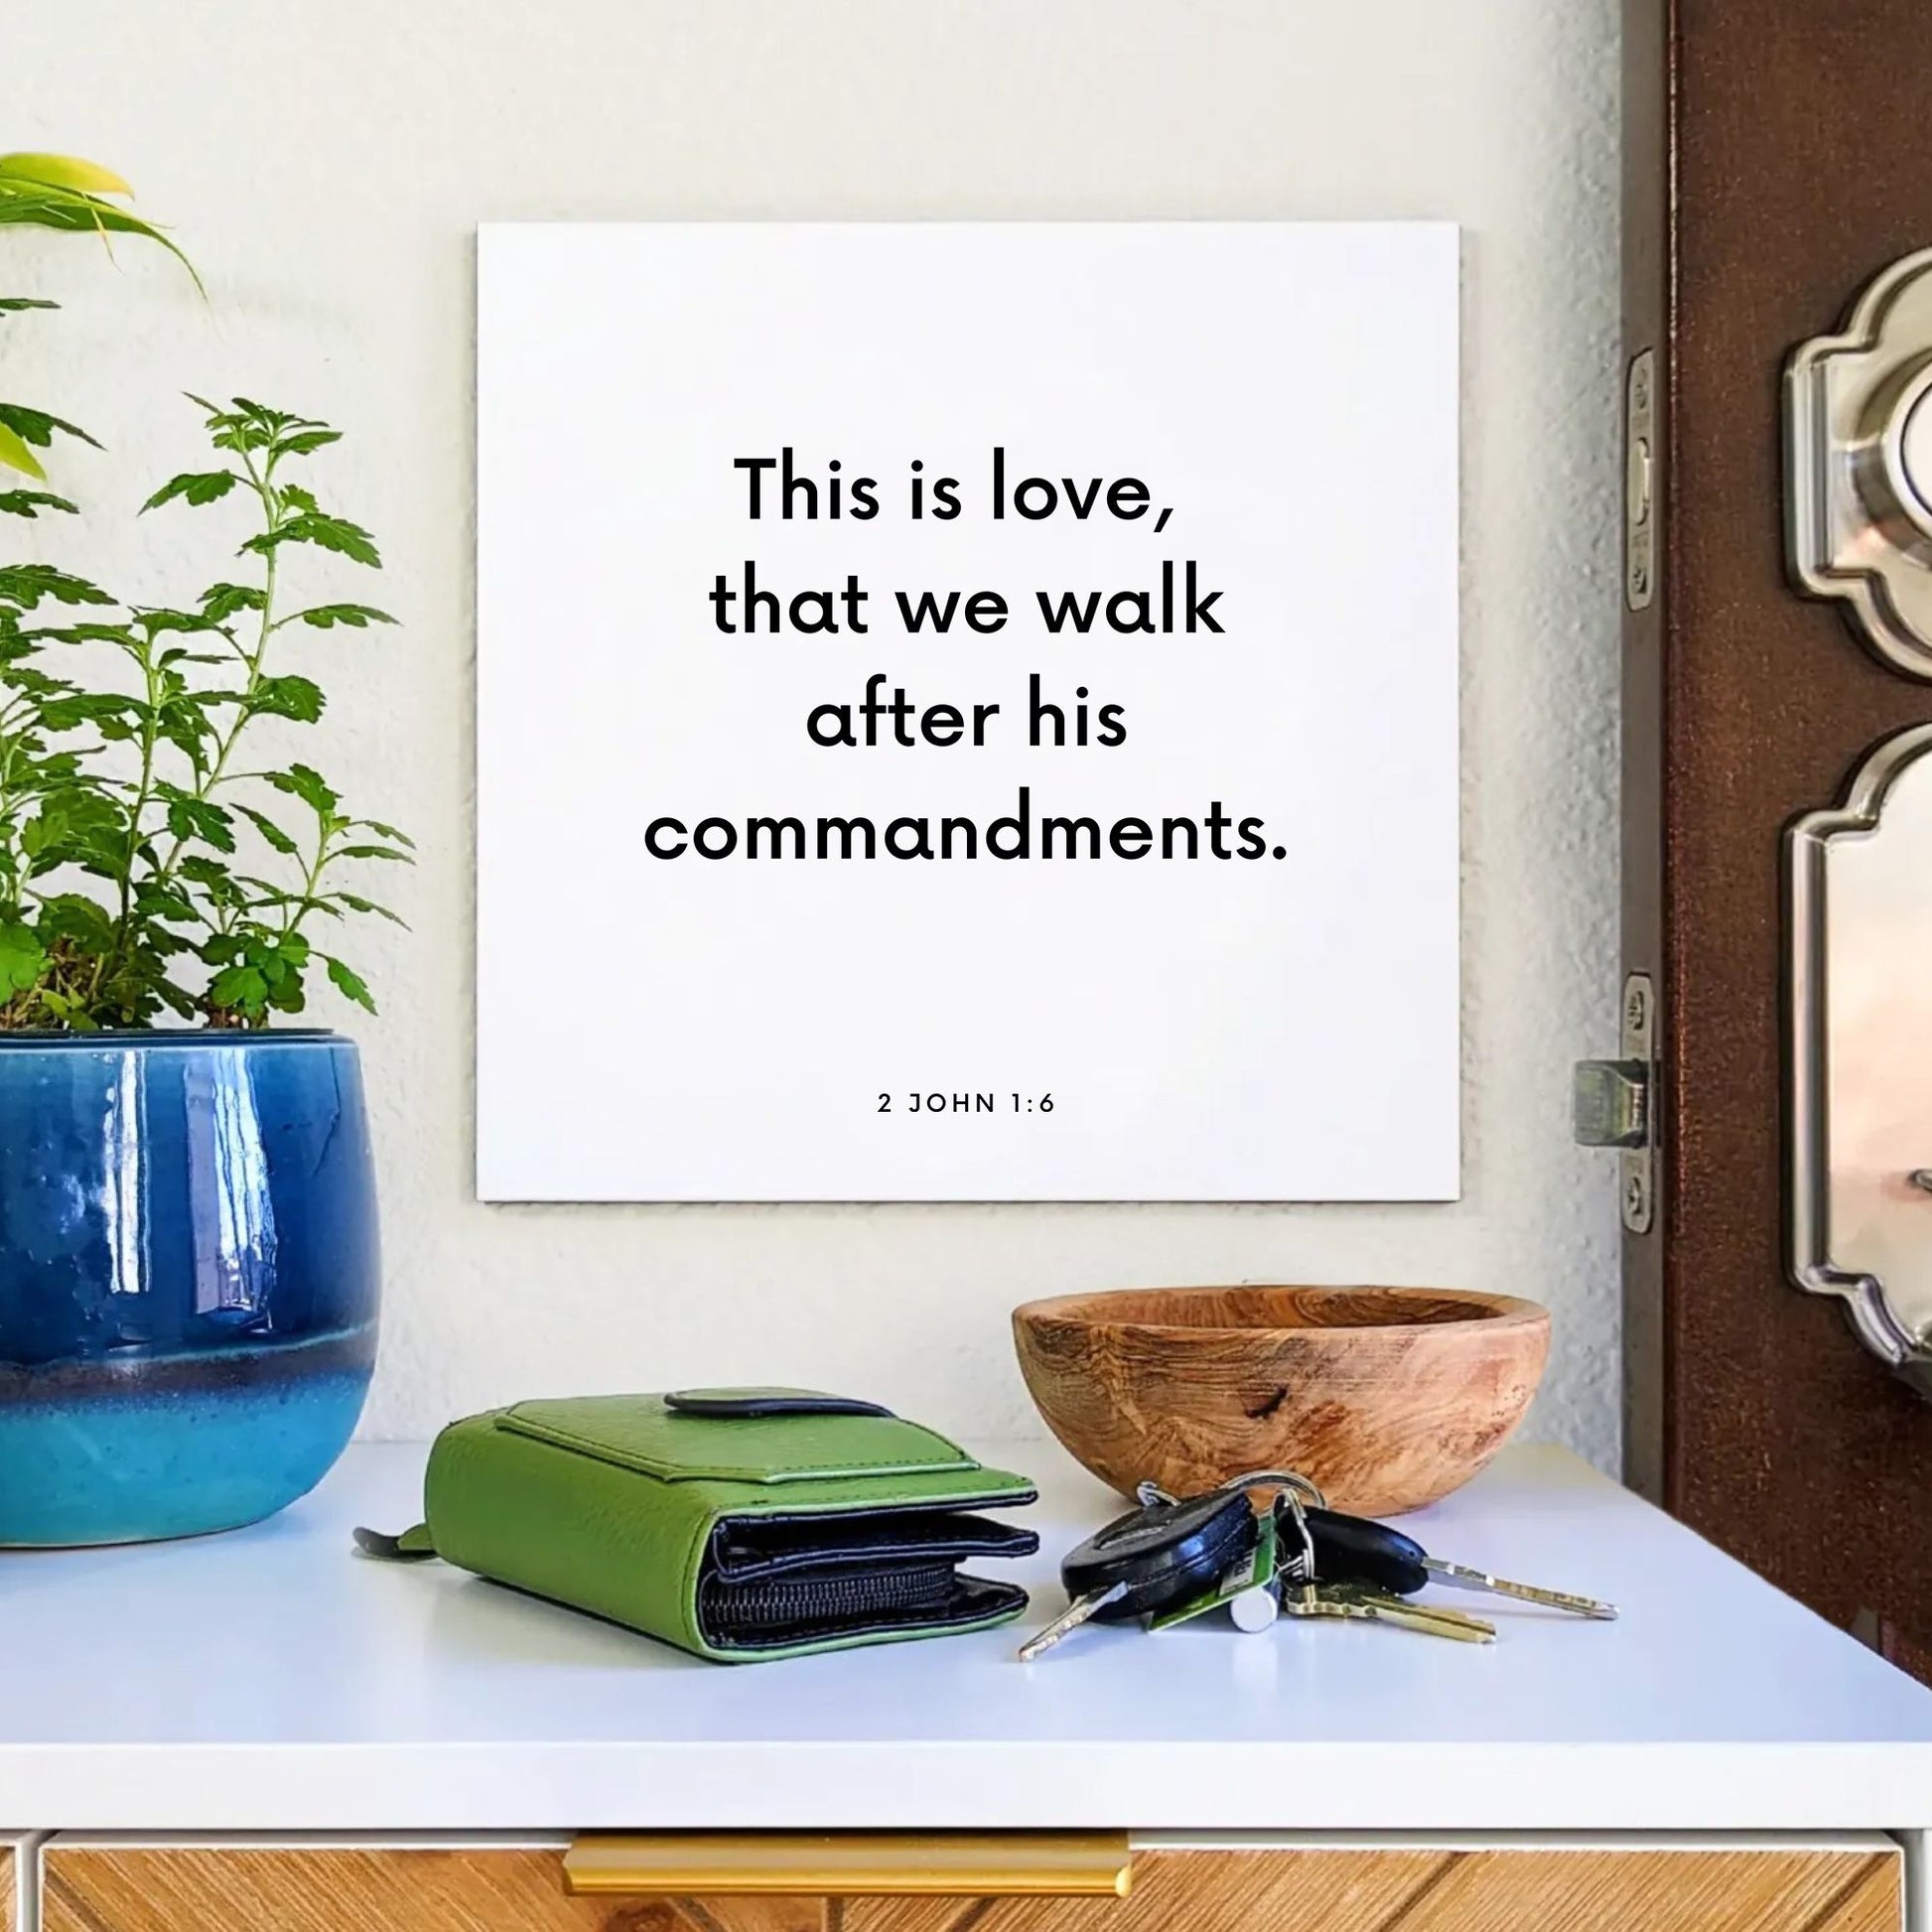 Entryway mouting of the scripture tile for 2 John 1:6 - "This is love, that we walk after his commandments"